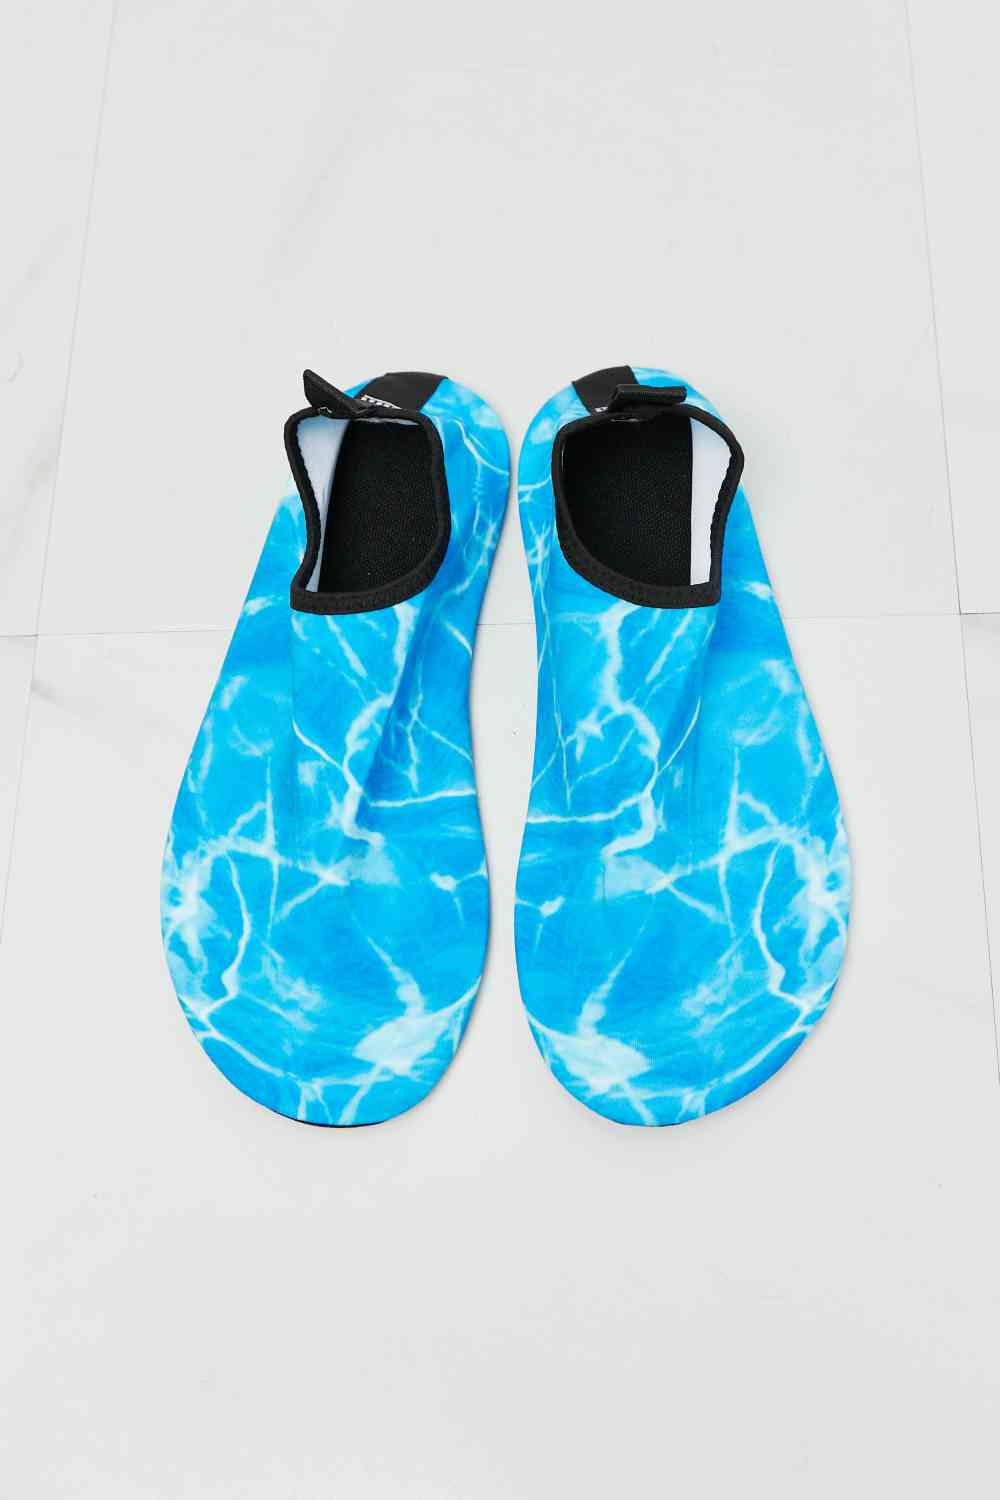 On The Shore Water Shoes in Sky Blue - Kawaii Stop - Aqua Footwear, Beach Adventures, Beach Days, Comfortable Shoes, Durable Materials, Kayaking, Melody, Outdoor Activities, Rubber Sole, Safety First, Ship from USA, Sky Blue, Slip-Resistant, Swimming, Two-Tone Design, US Sizing, Water Protection, Water Shoes, Wet Surfaces